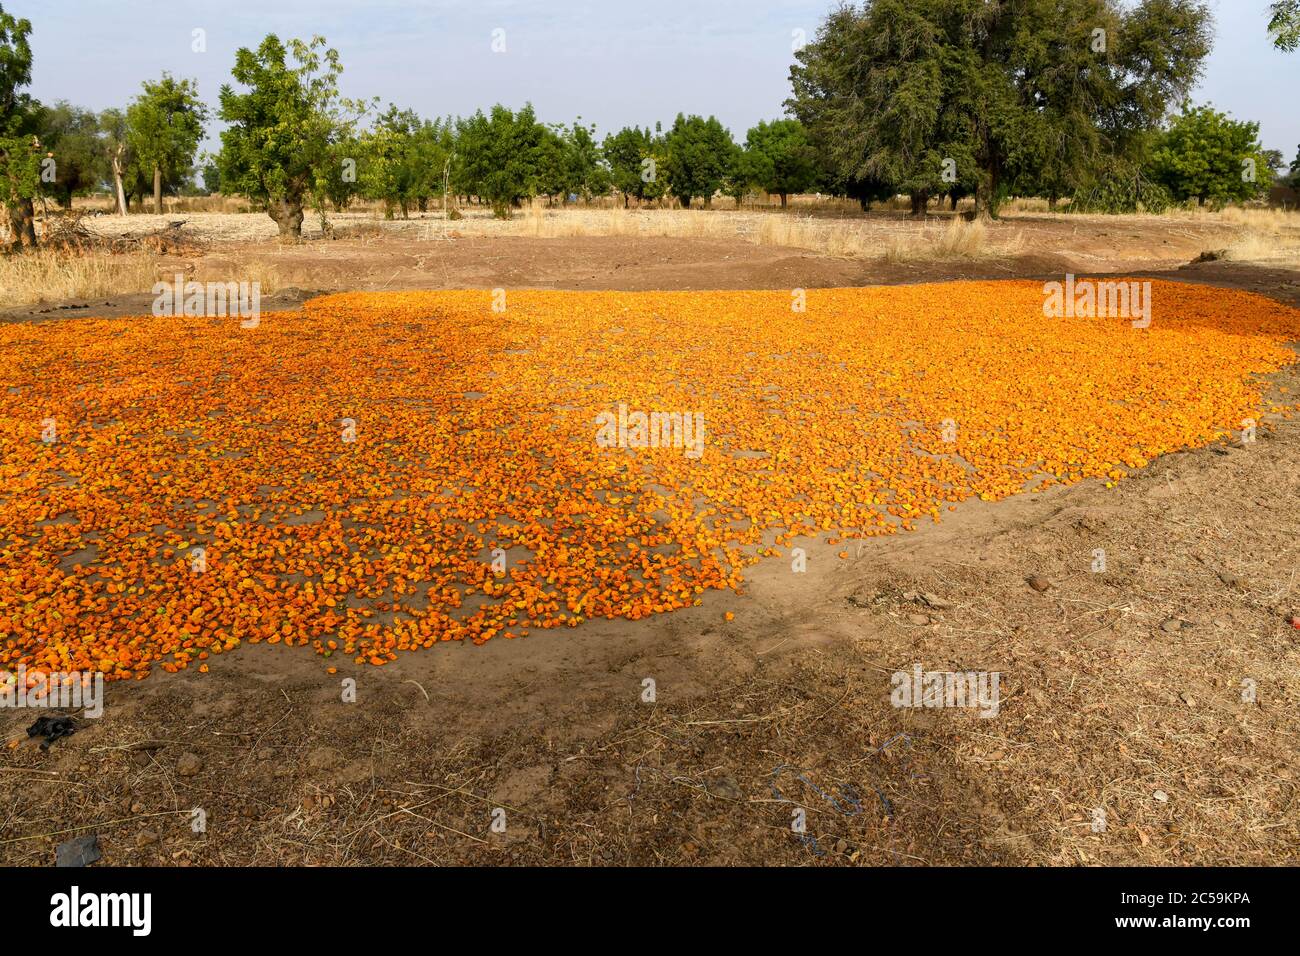 Africa, West Africa, Burkina Faso, Tenkodogo. Freshly harvested chillies are spread out on the ground to dry in the sun. Stock Photo